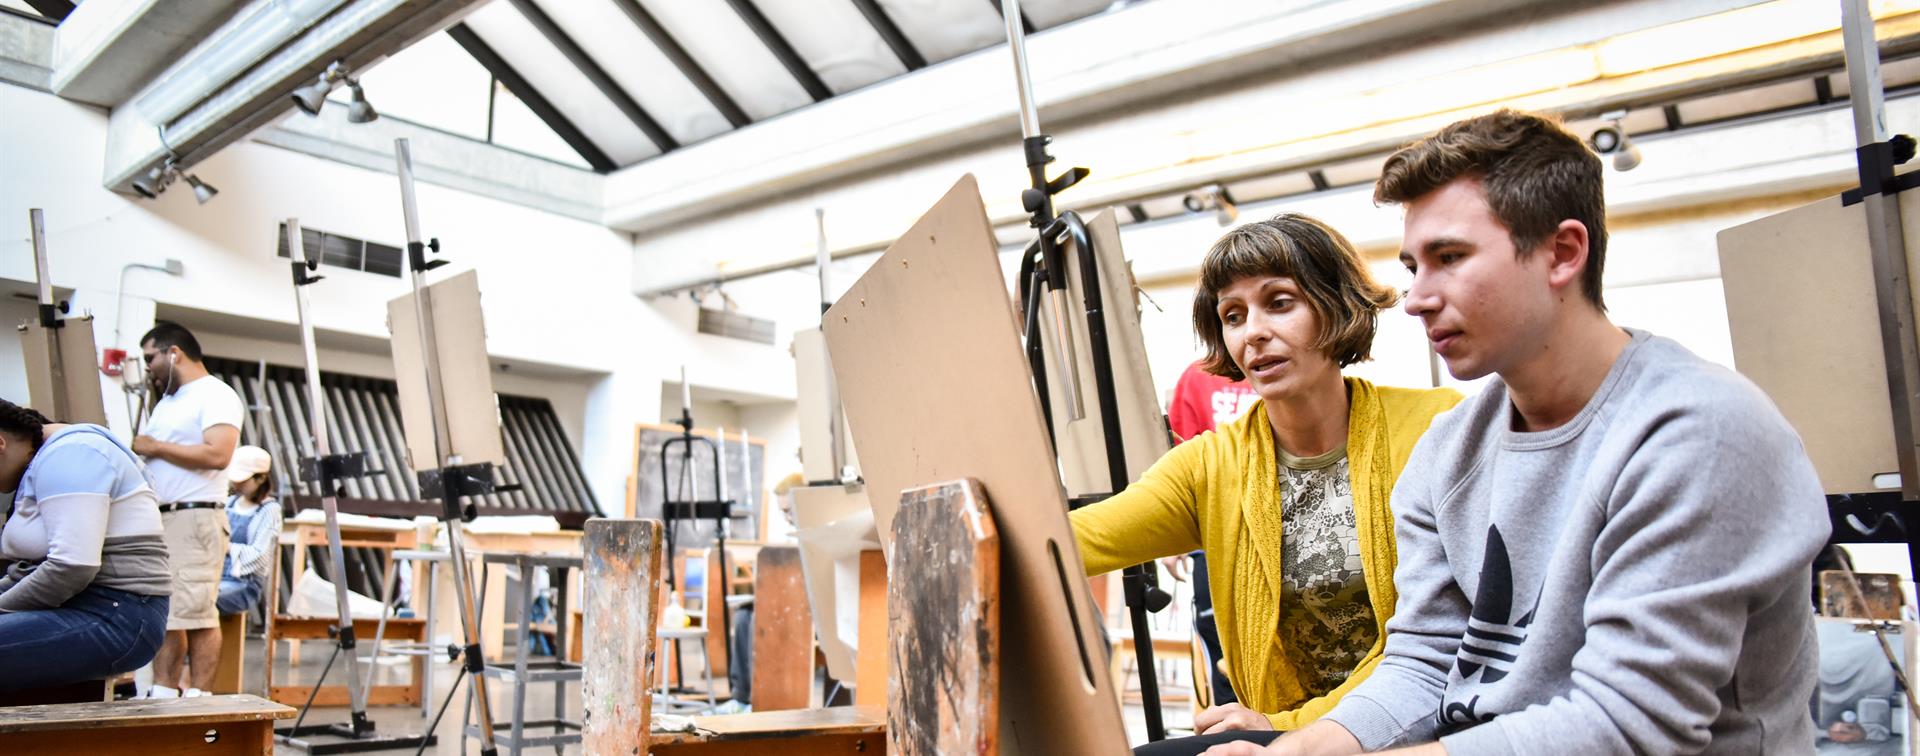 A faculty member oversees a student art project at an easel.